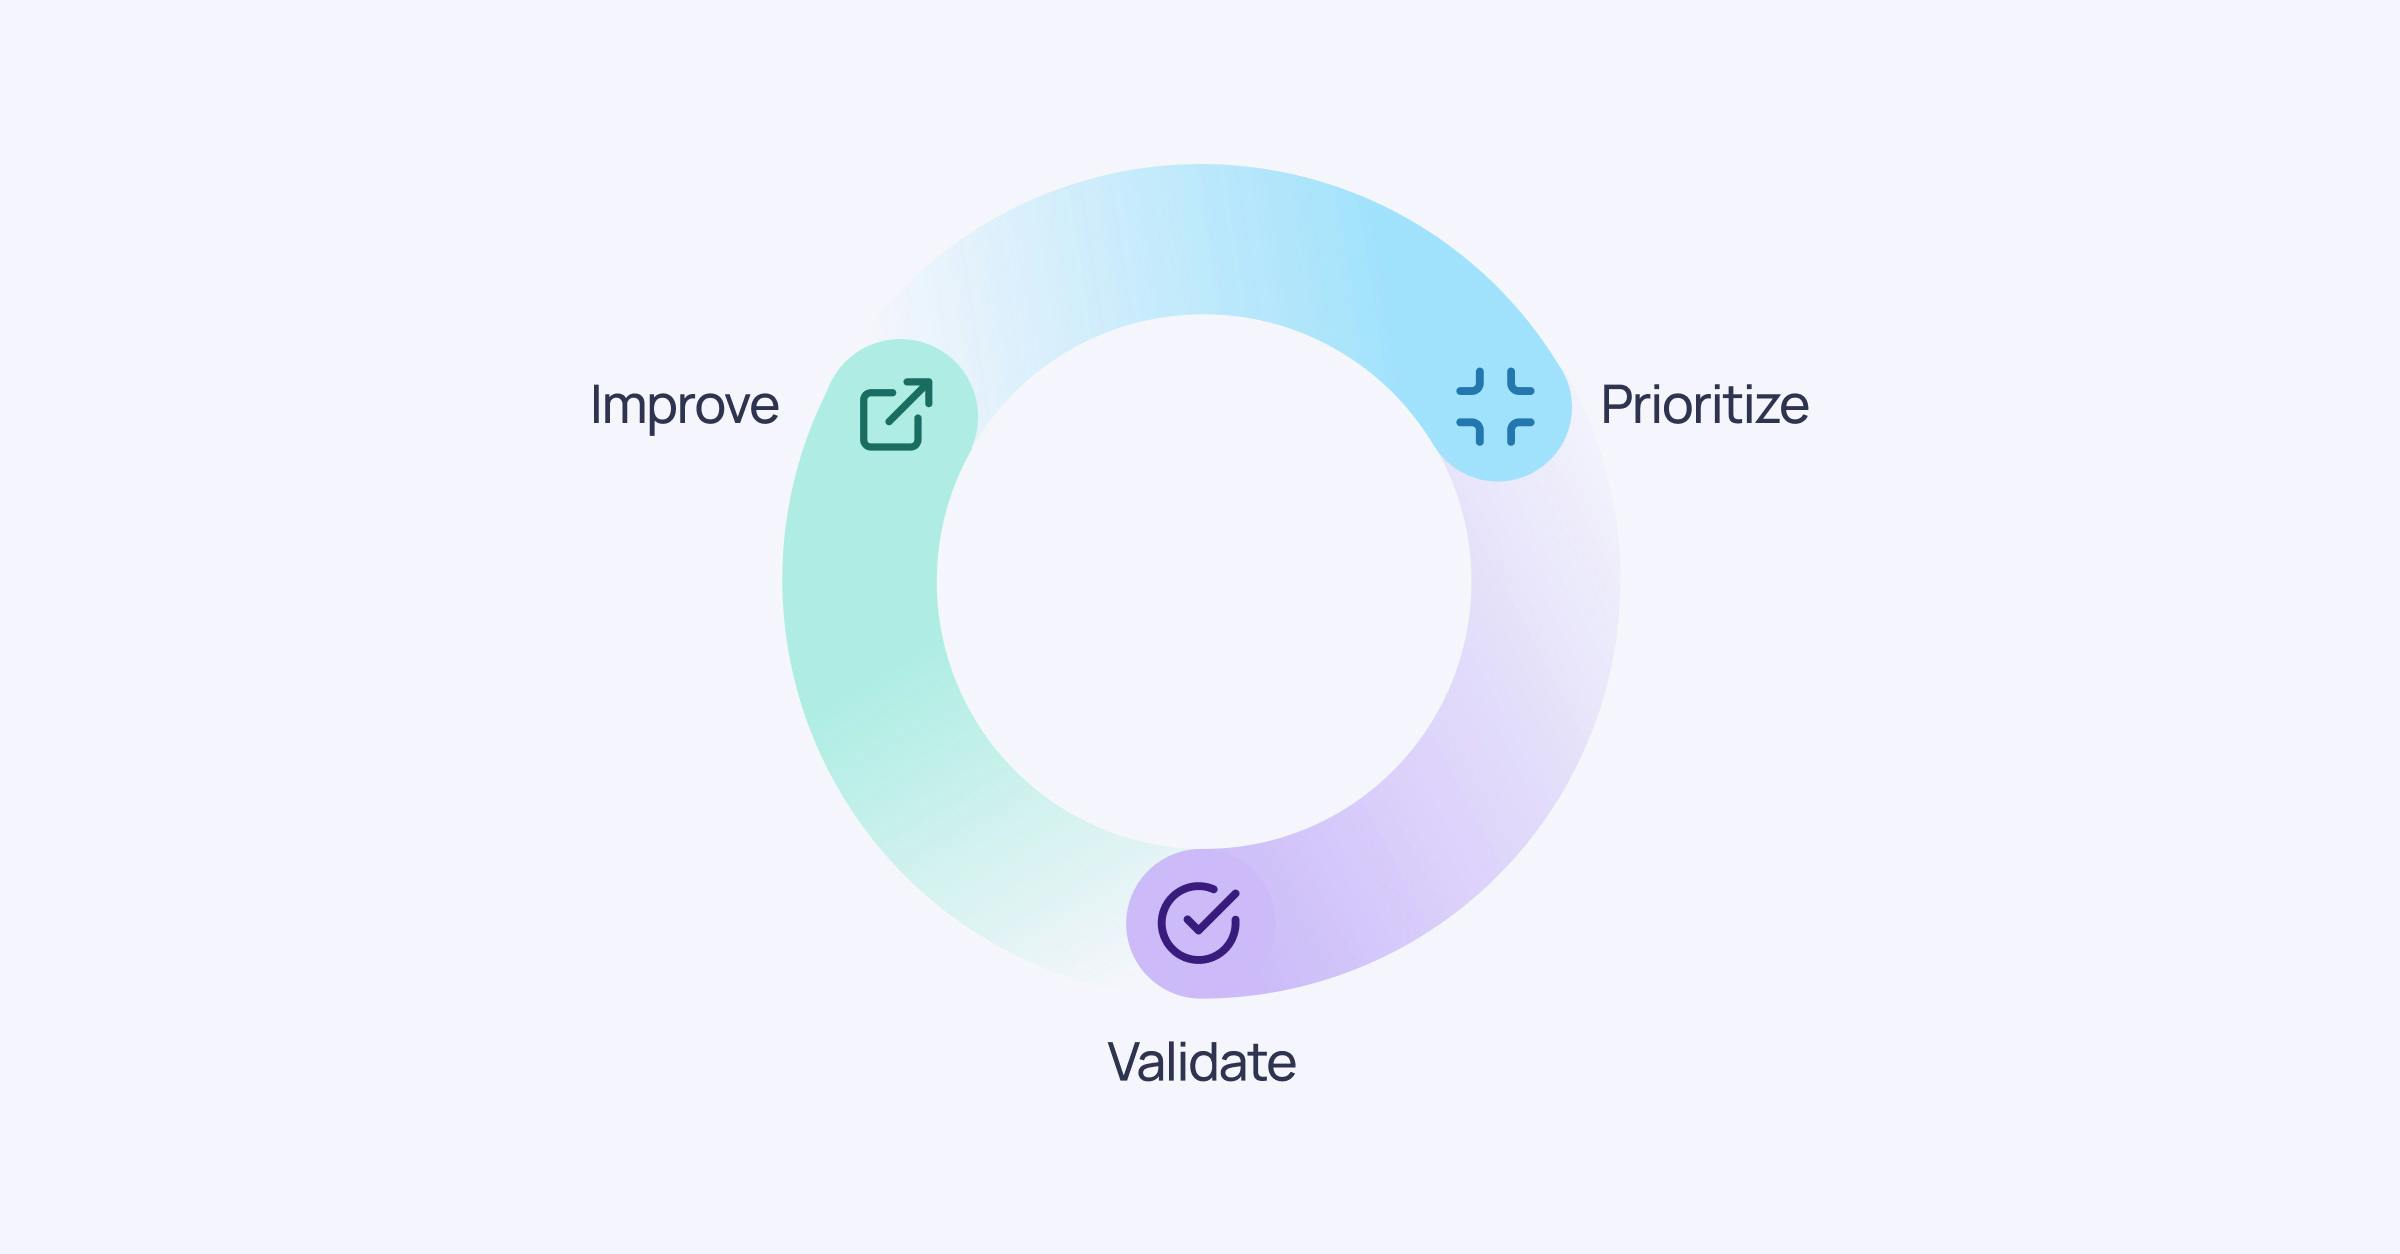 Circular flow with three colors: blue for prioritize, purple for validate and green for improve